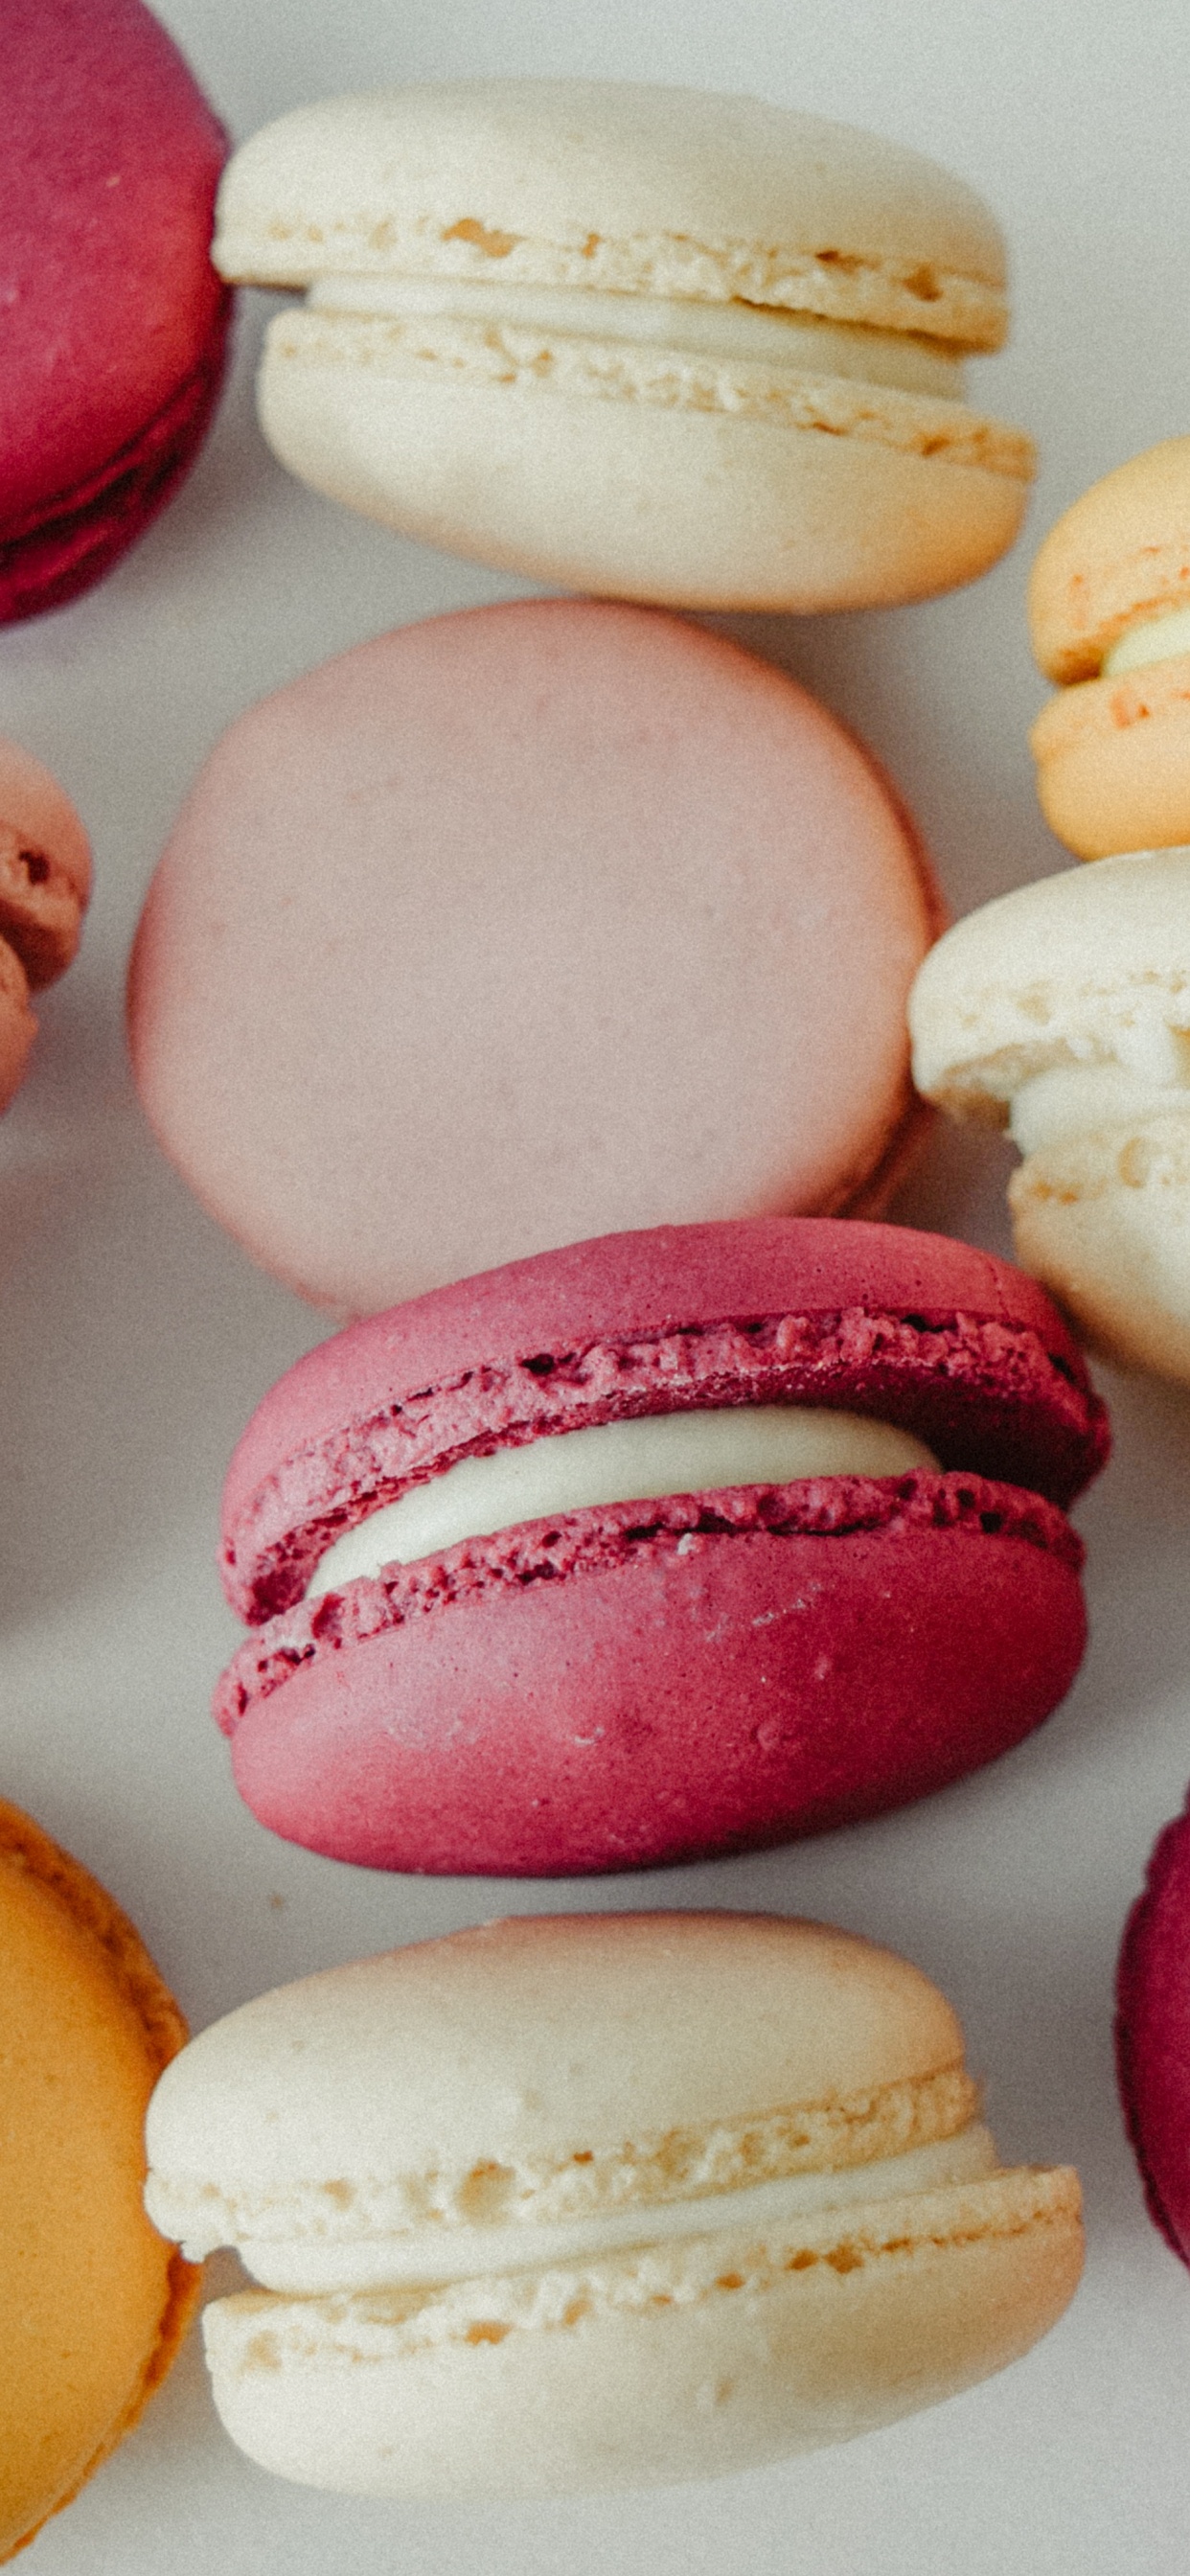 Pink Yellow and White Macaroons. Wallpaper in 1242x2688 Resolution